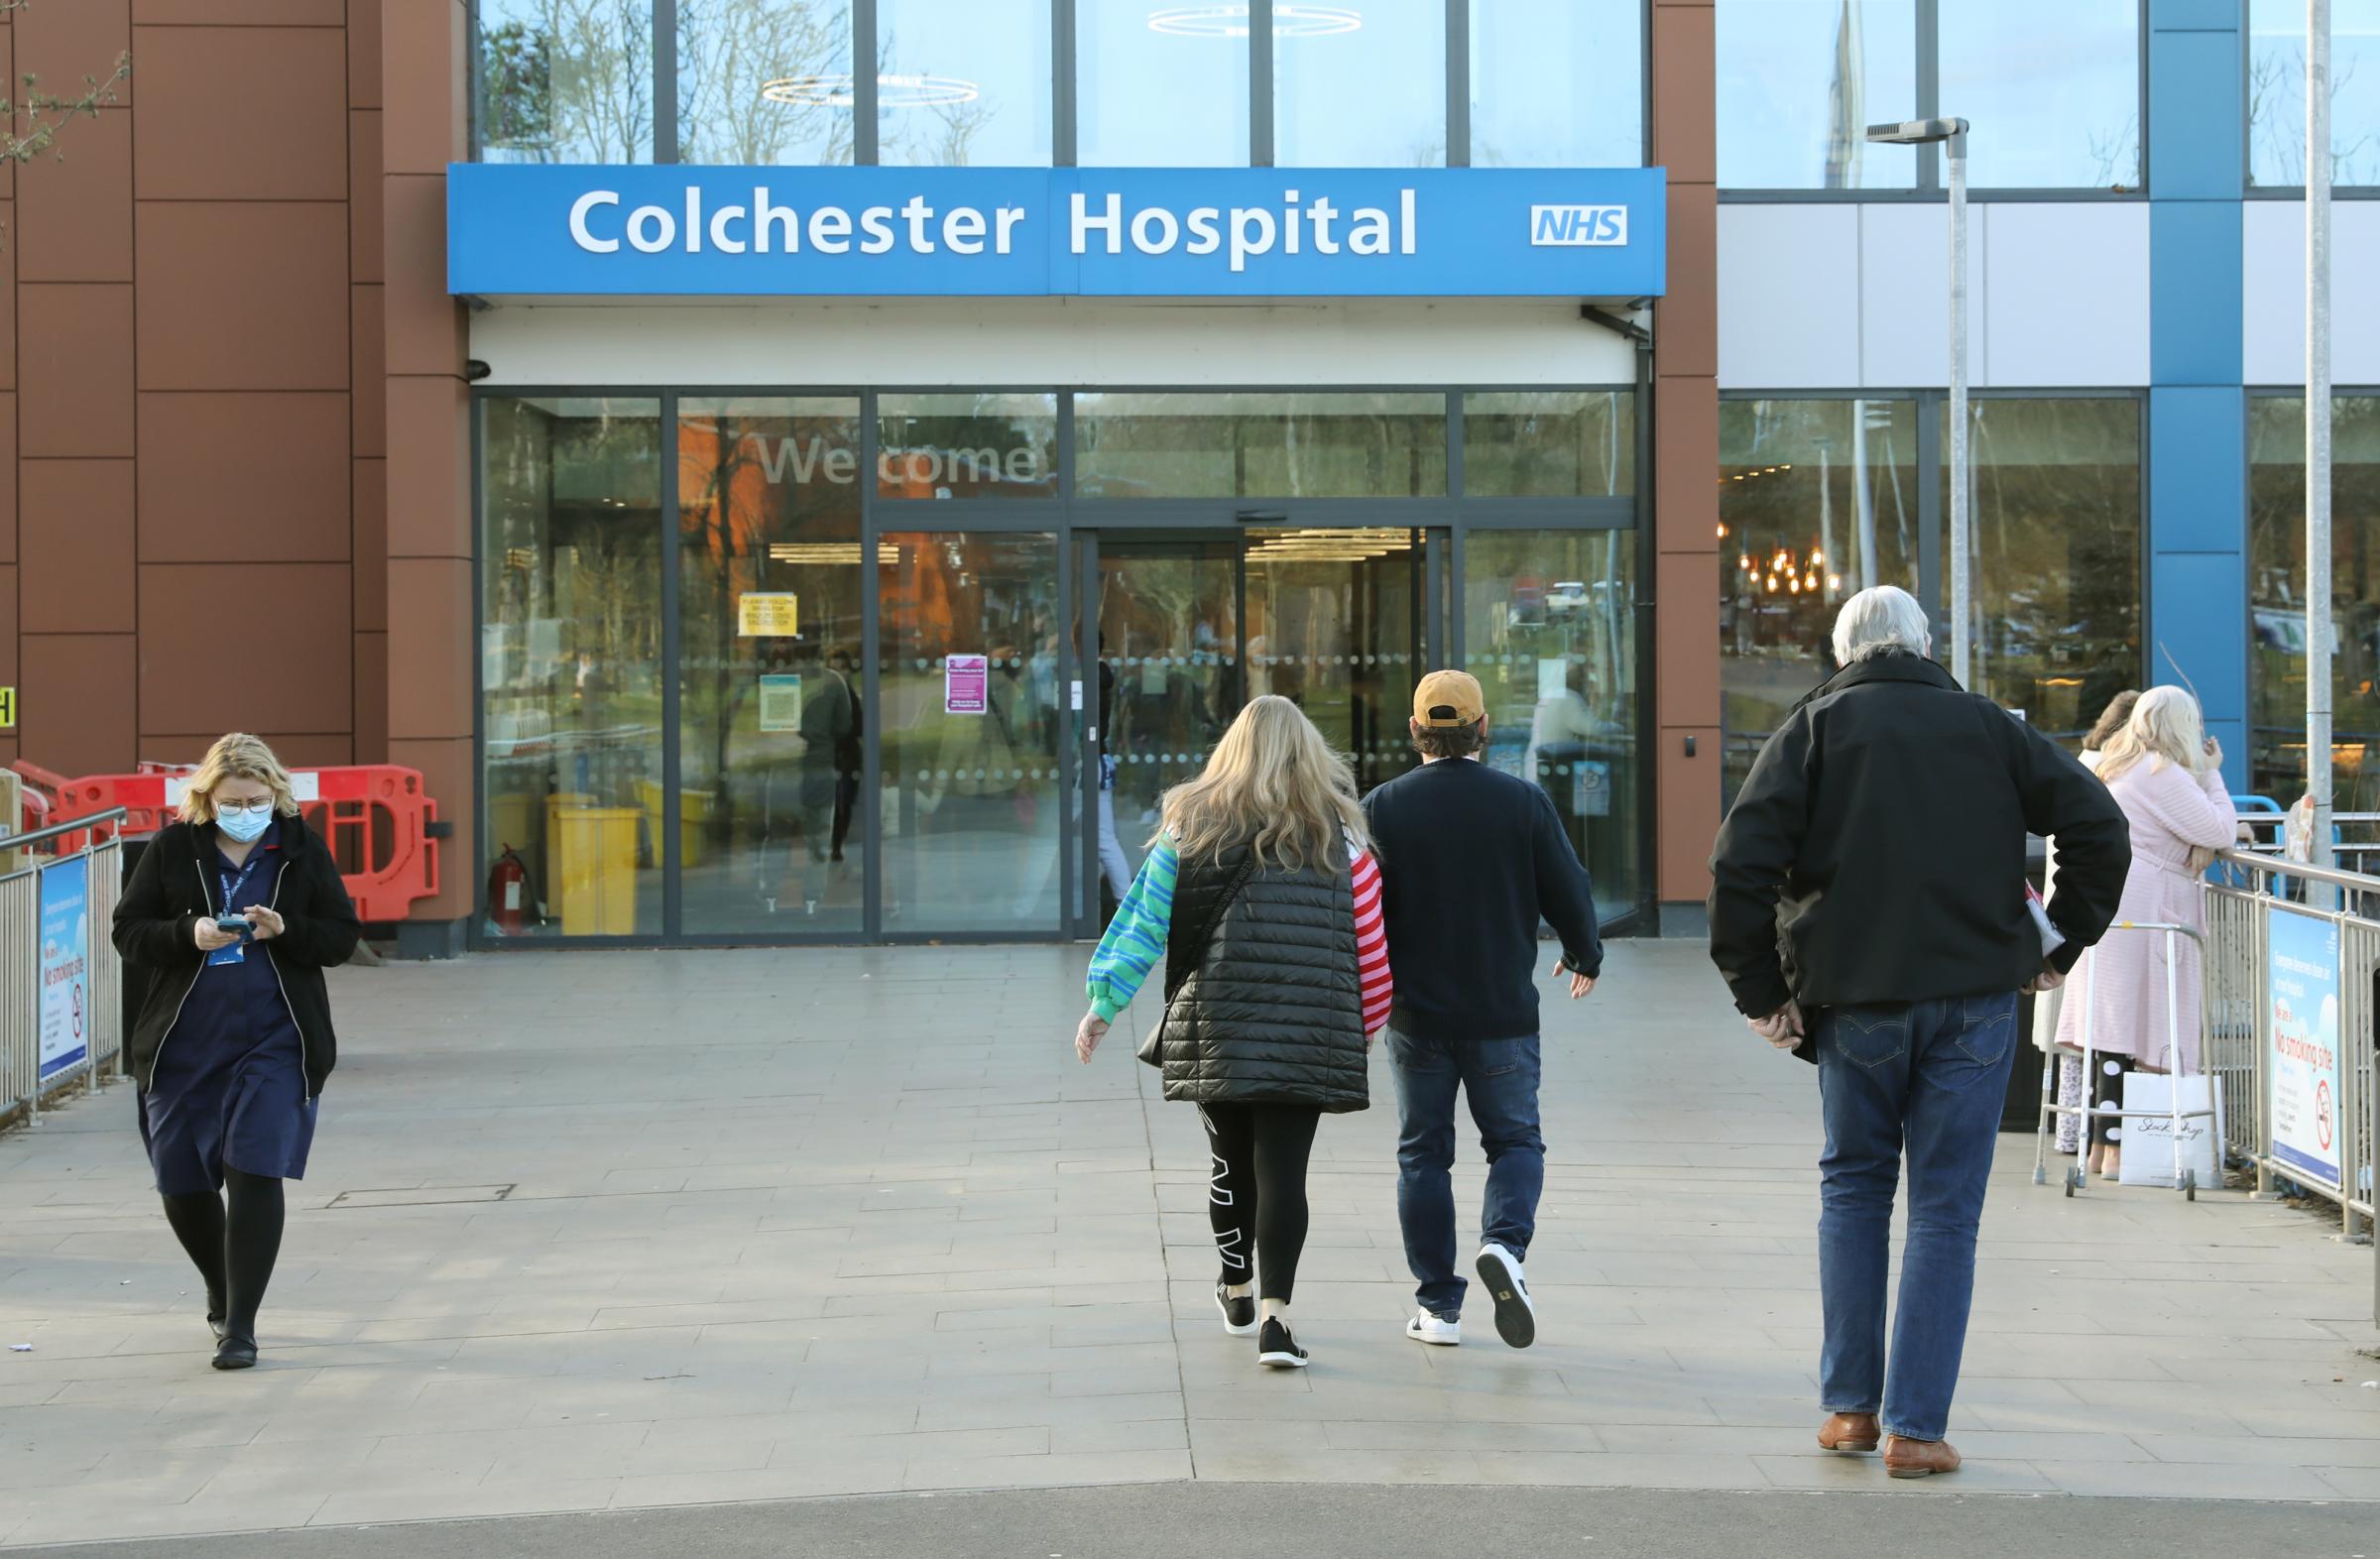 Essex to get almost £5million to discharge more people from hospital